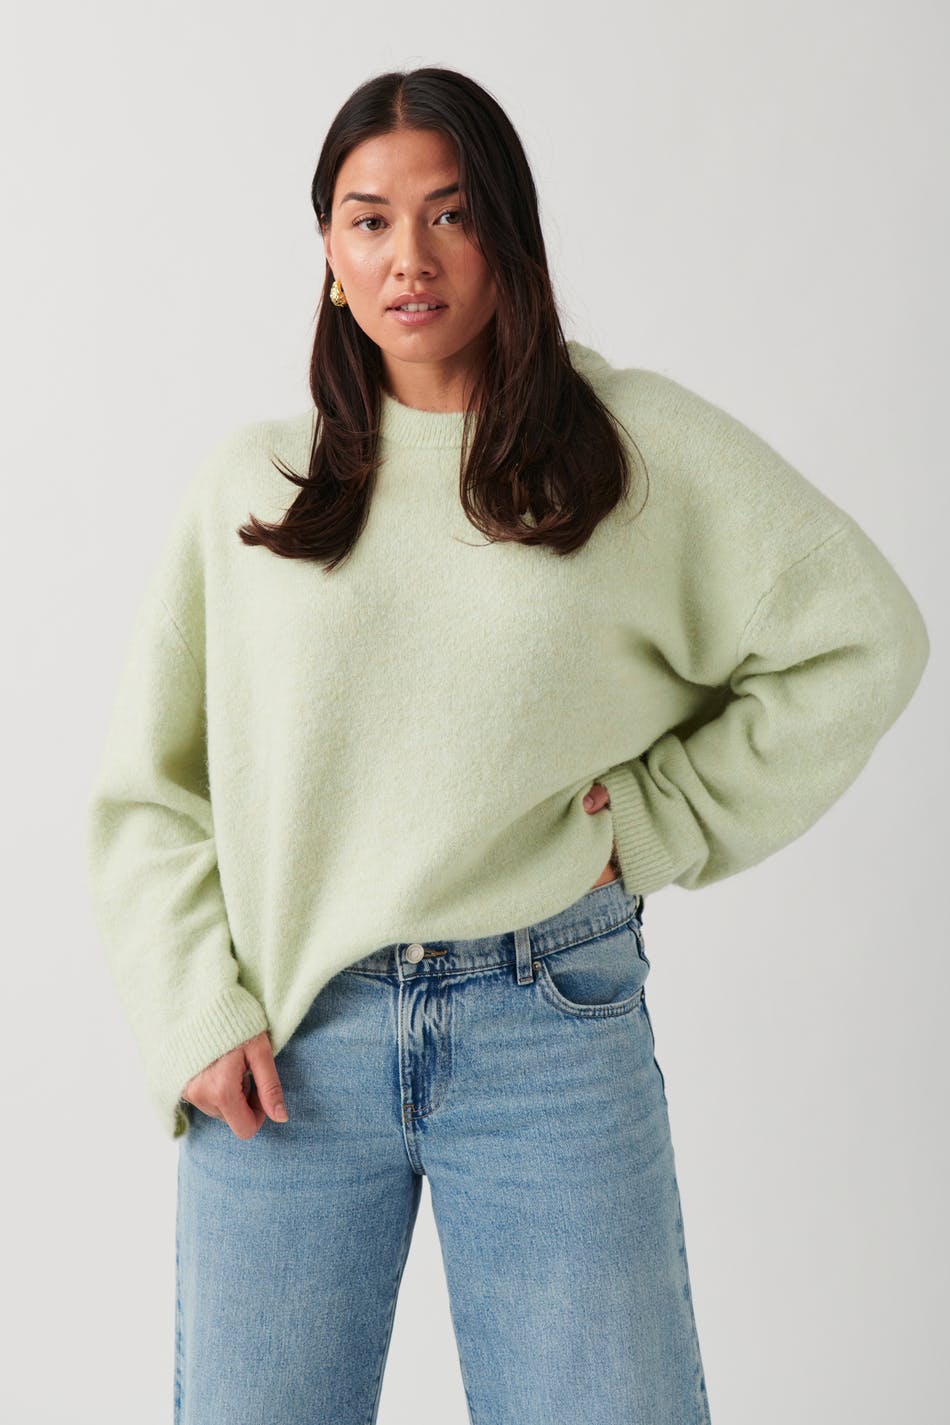 Gina Tricot - Crew neck knitted sweater - stickade tröjor - Green - S - Female